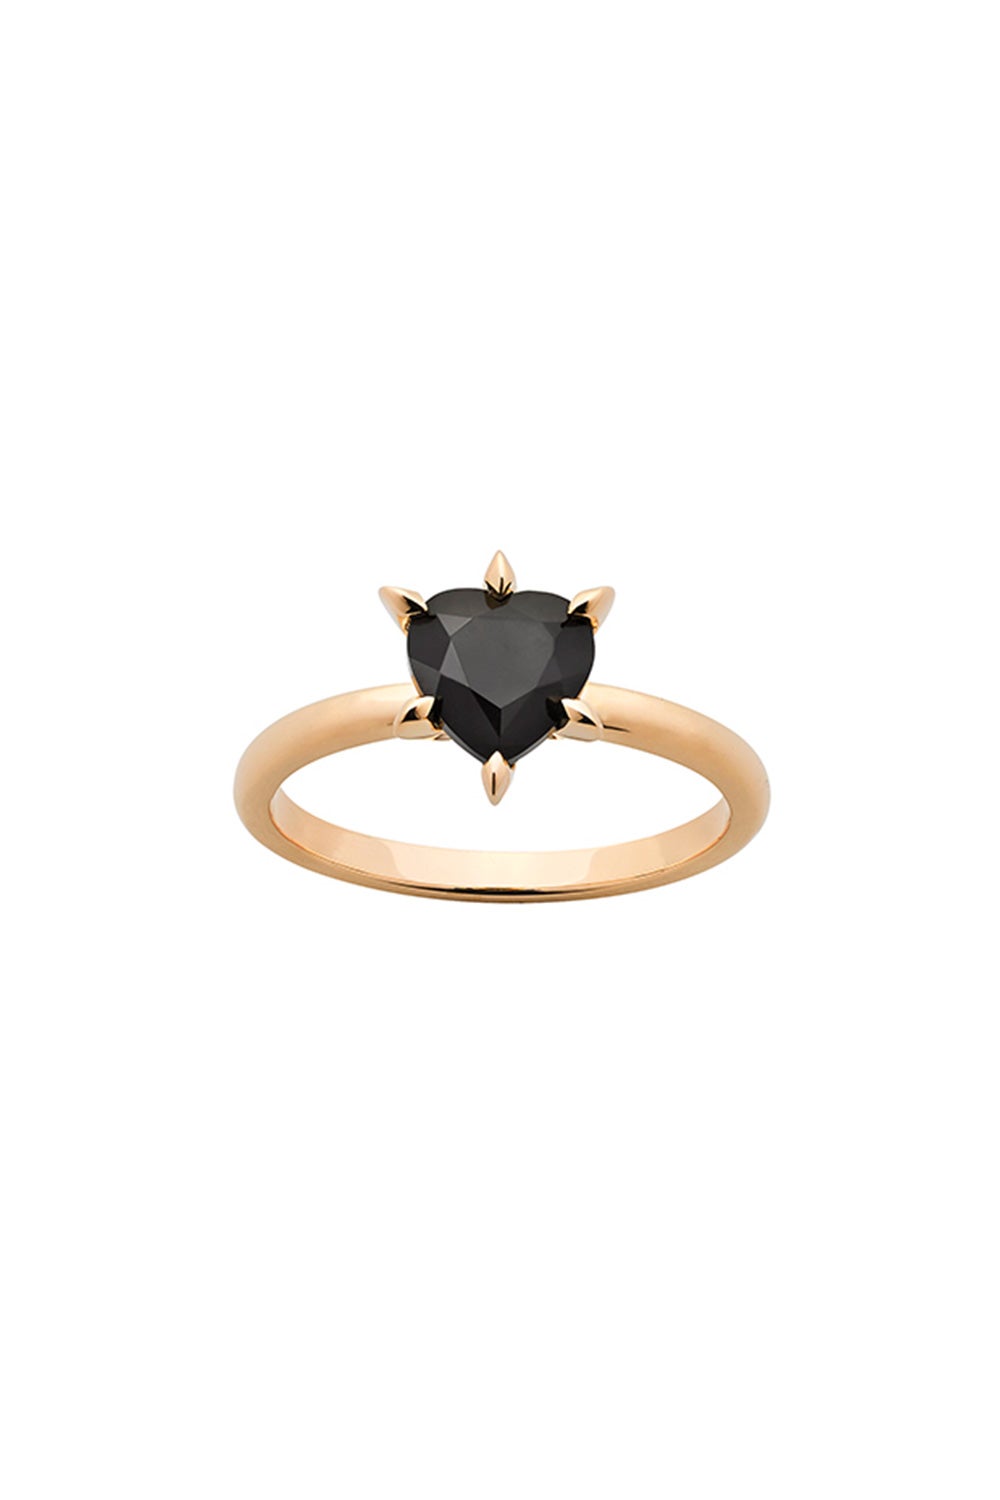 Cupid's Heart Ring Gold Onyx